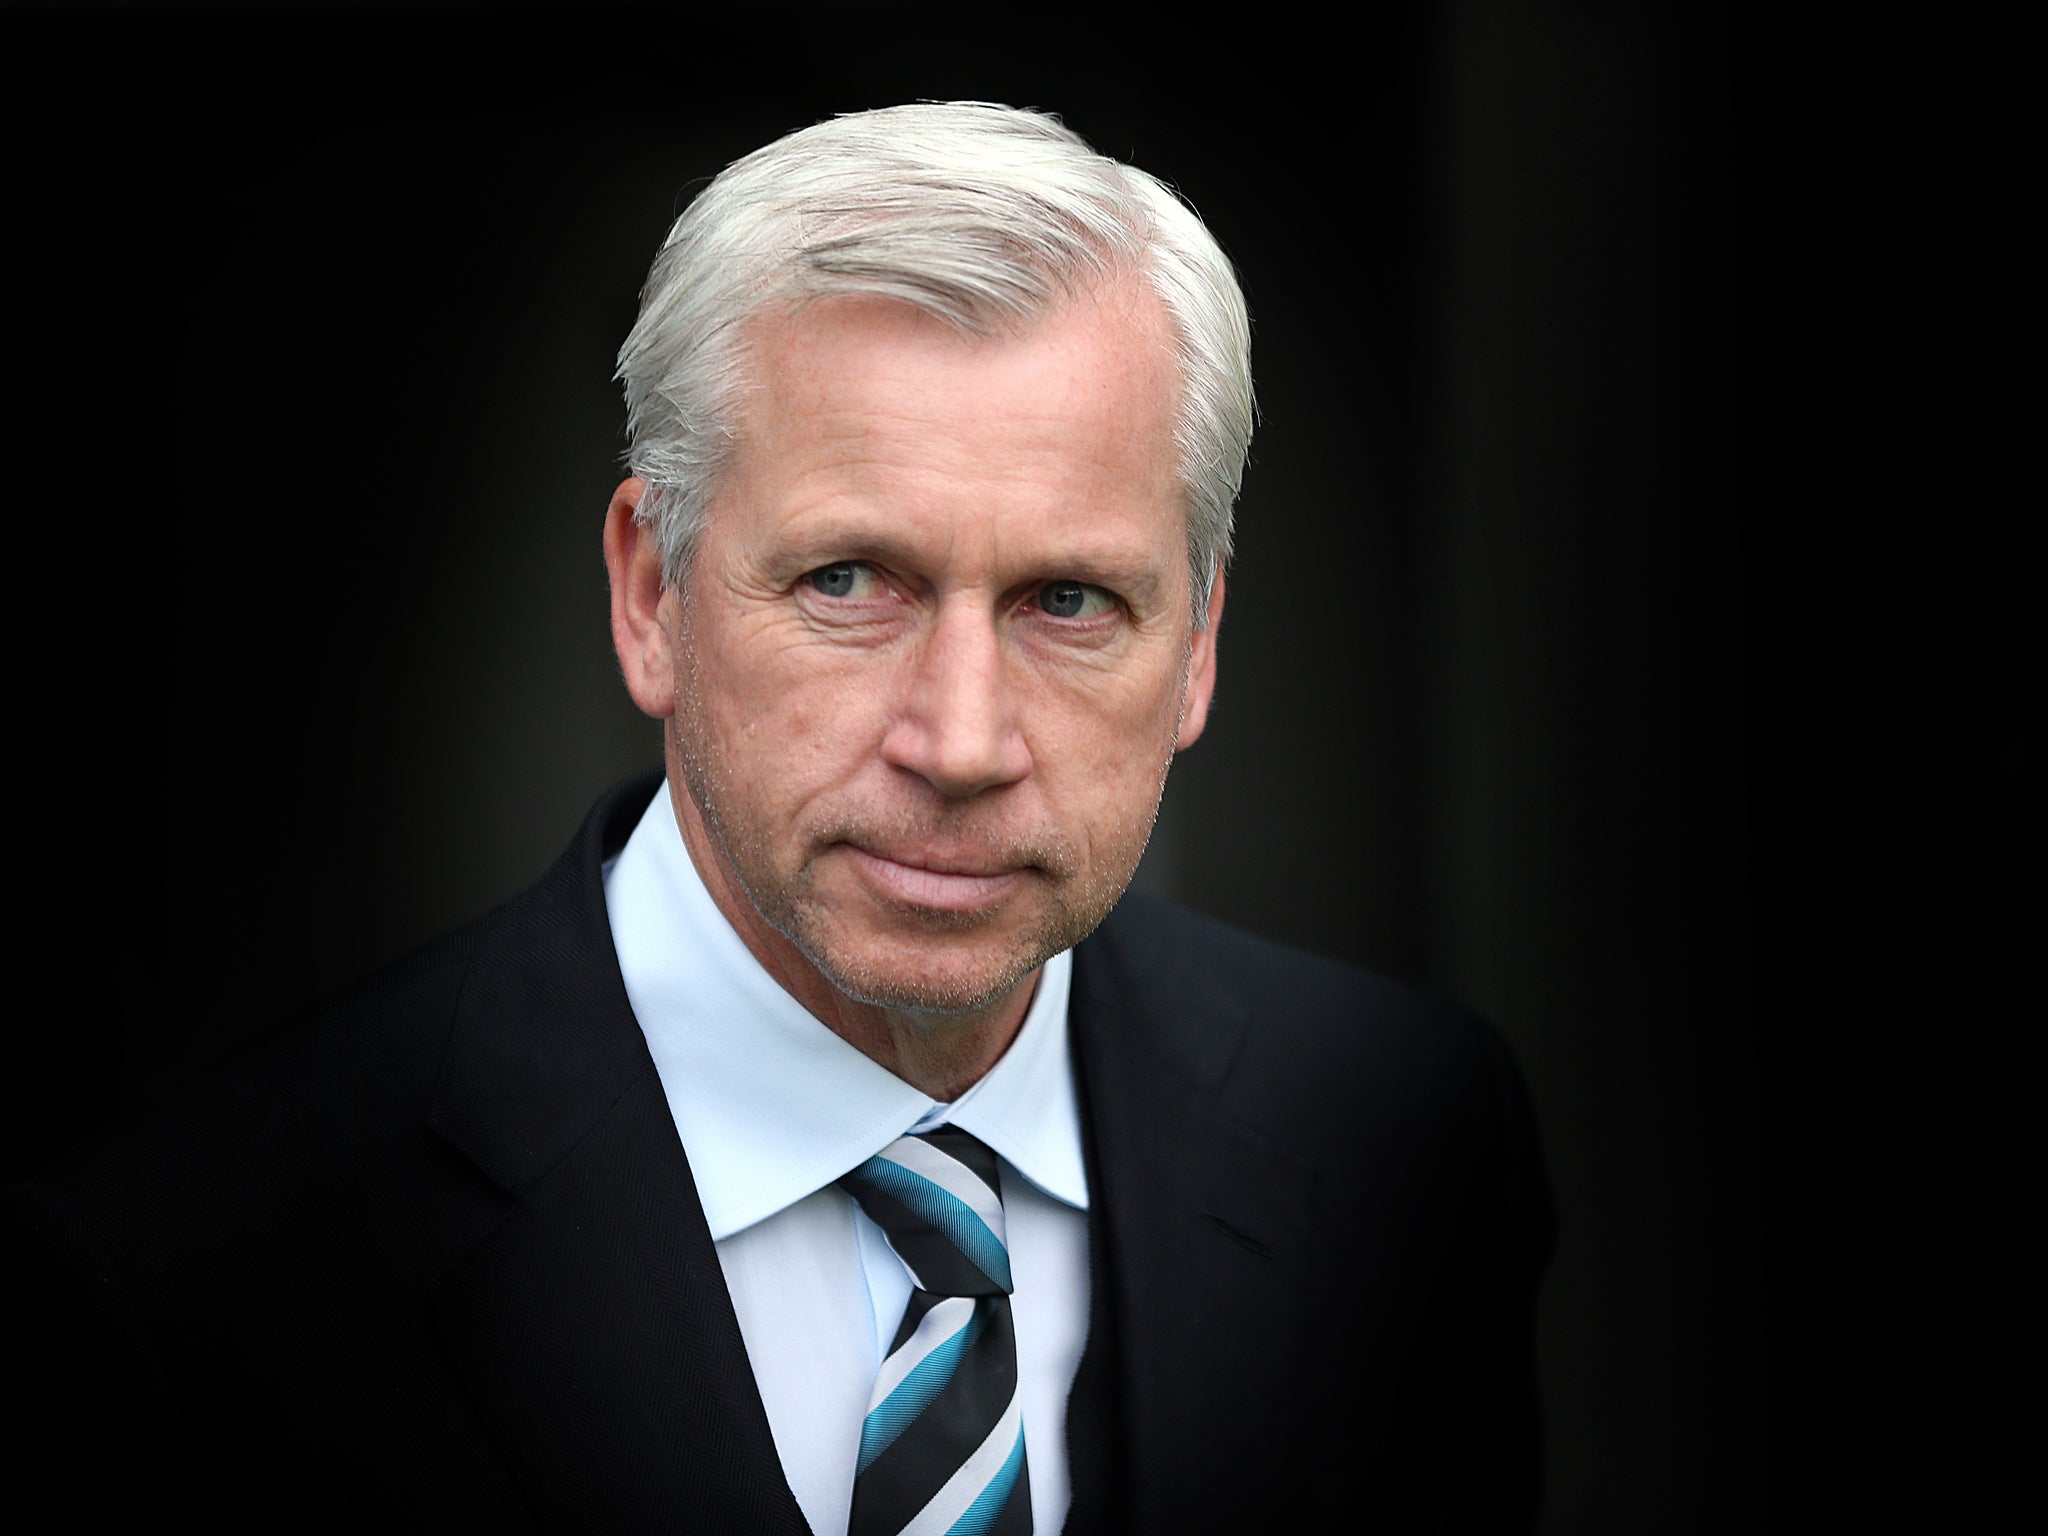 Alan Pardew has admitted that last season's shock defeat to Sunderland has left him scarred